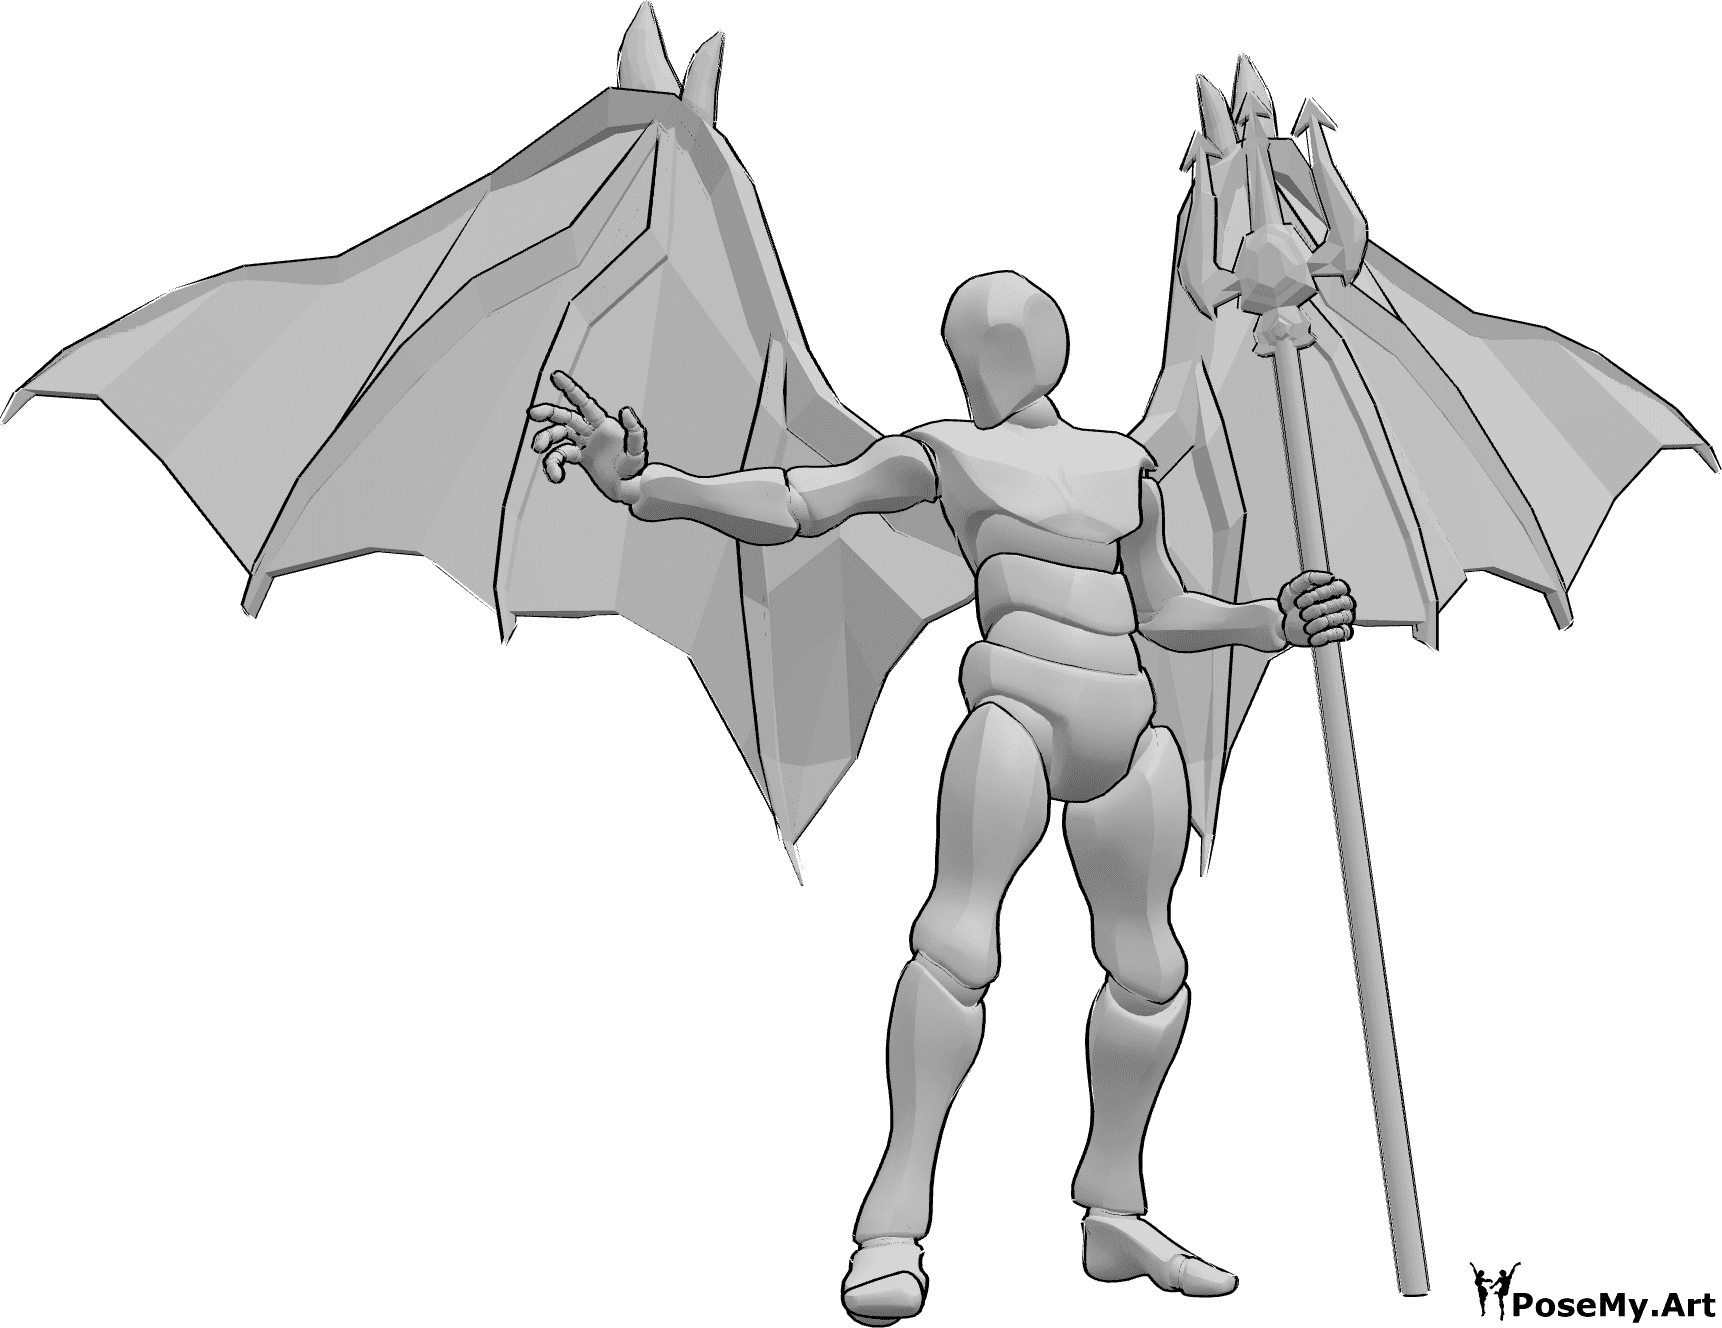 Pose Reference- Demon spell casting pose - Male with devil wings is standing, holding a trident in his left hand and casting a spell with his right hand